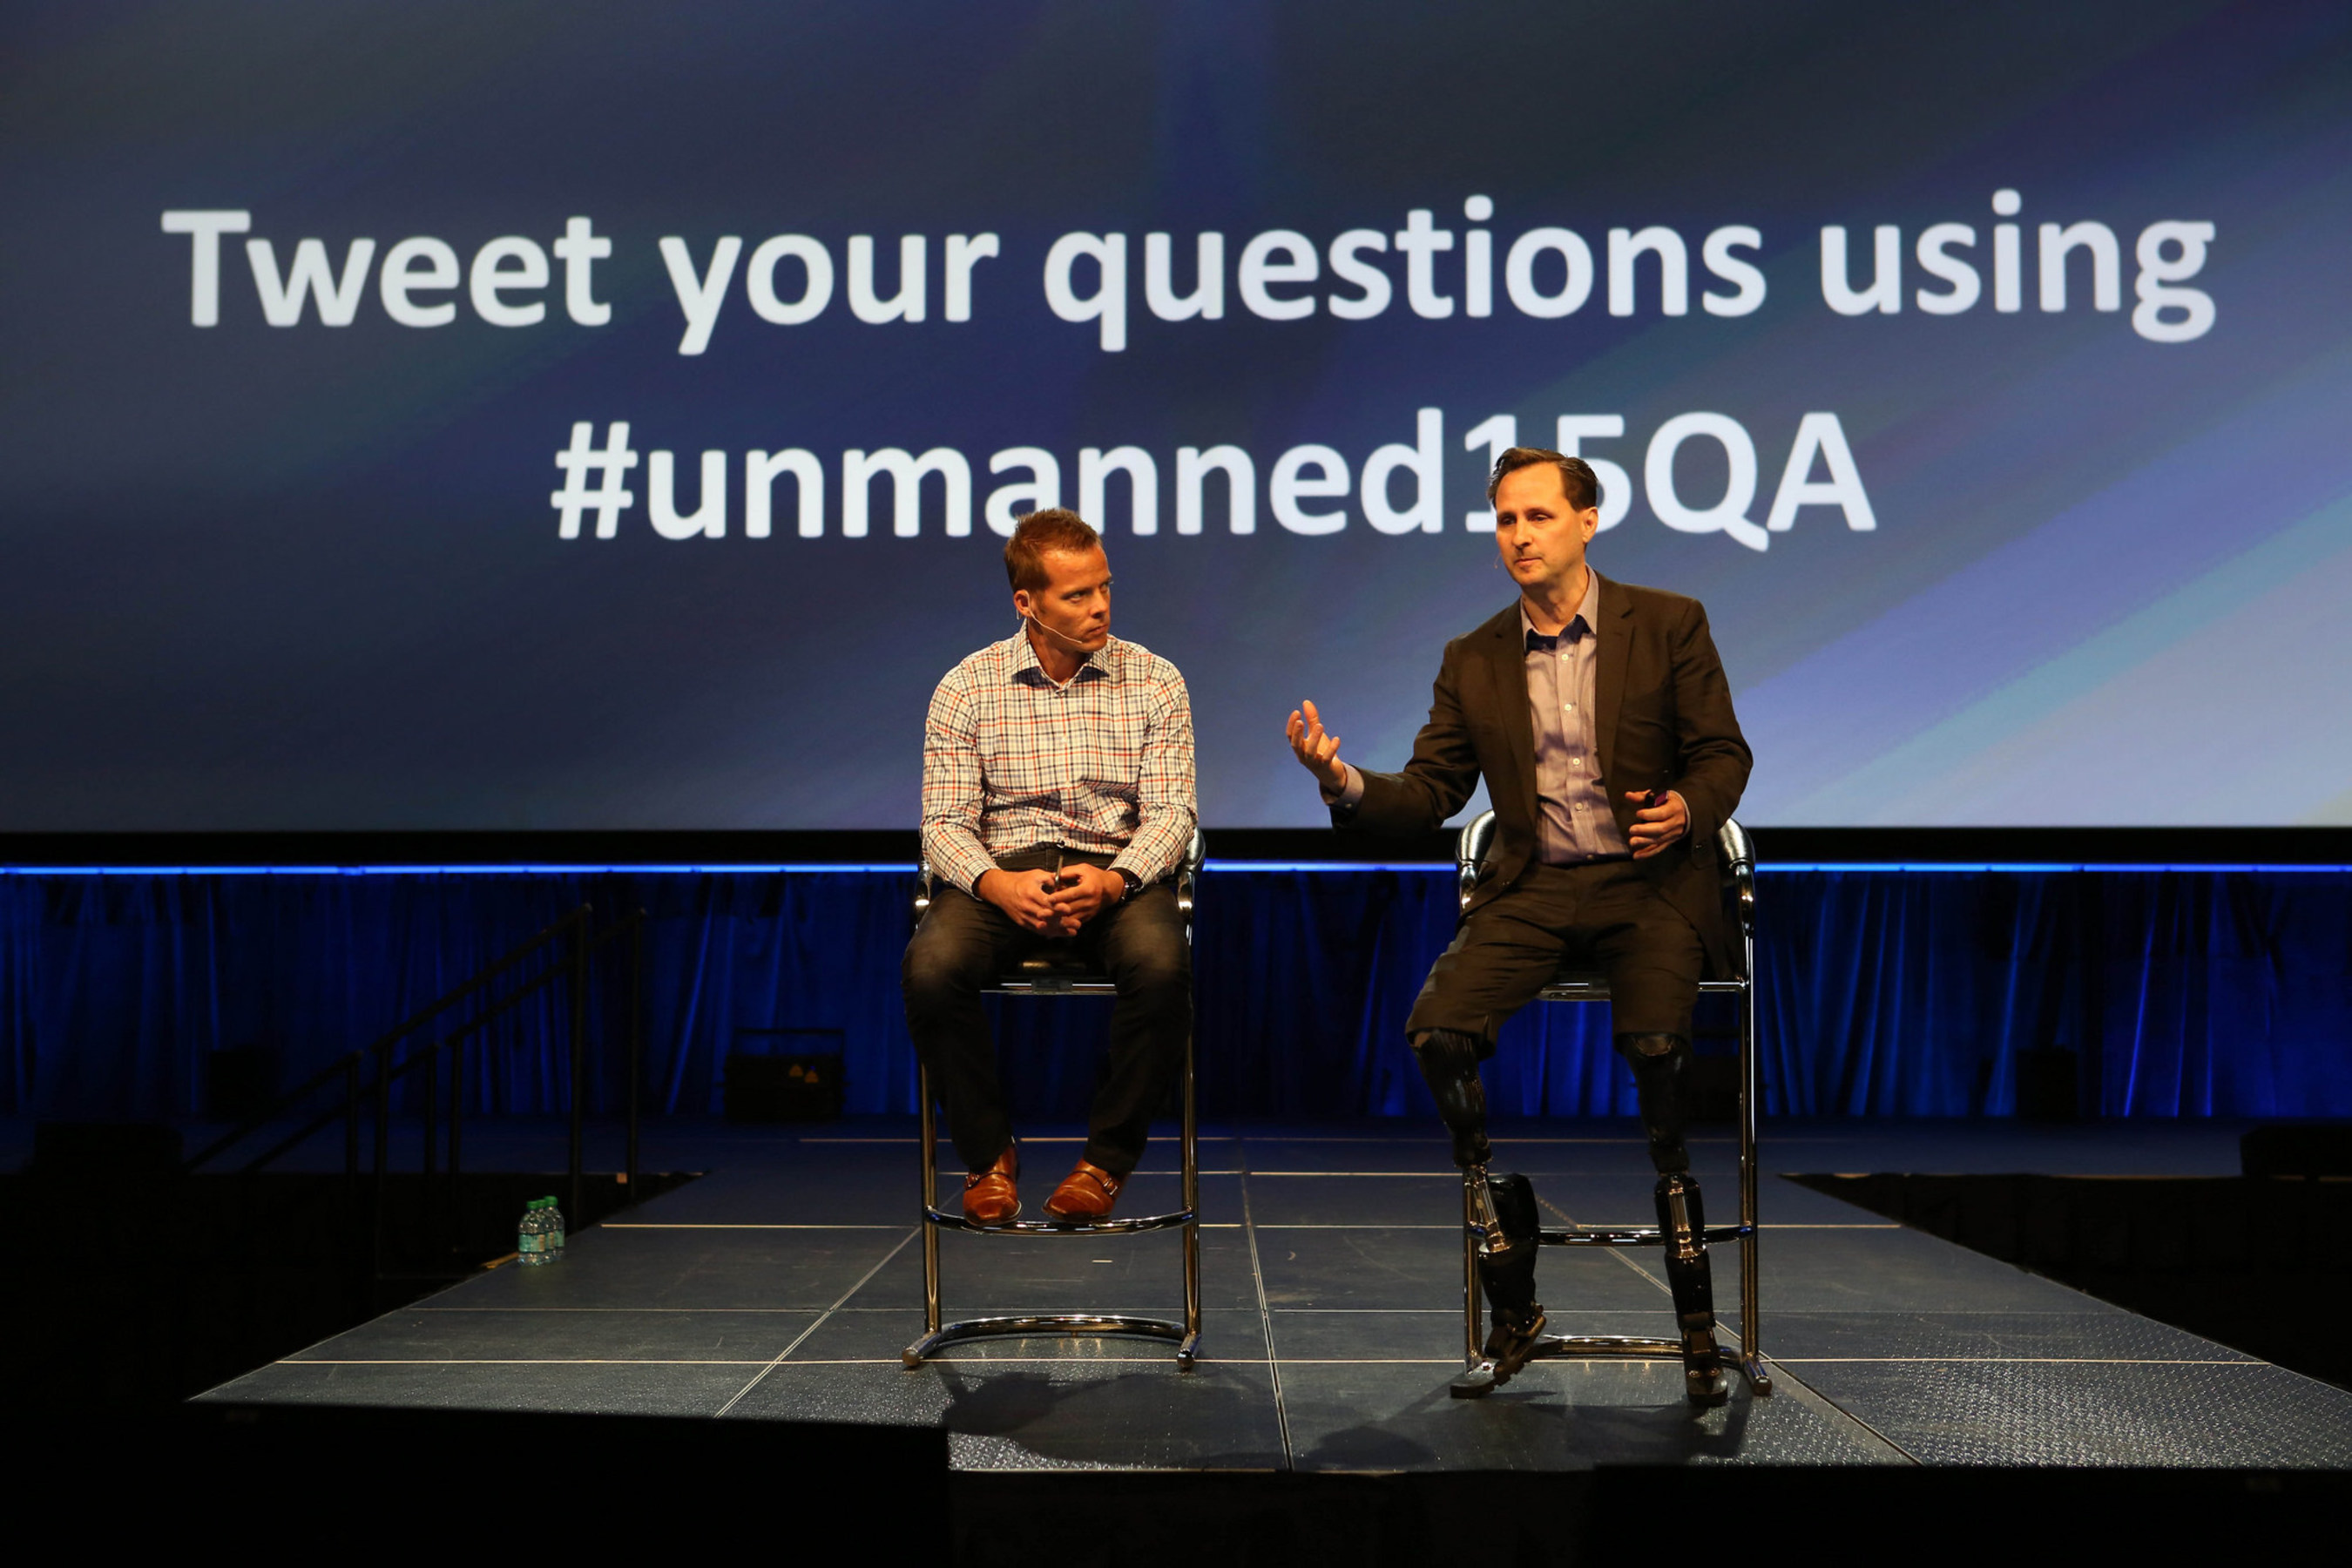 Dr. Hugh Herr answers questions about the future of bionics at AUVSI's conference in 2015, hosted by Colin Guinn of 3D Robotics.